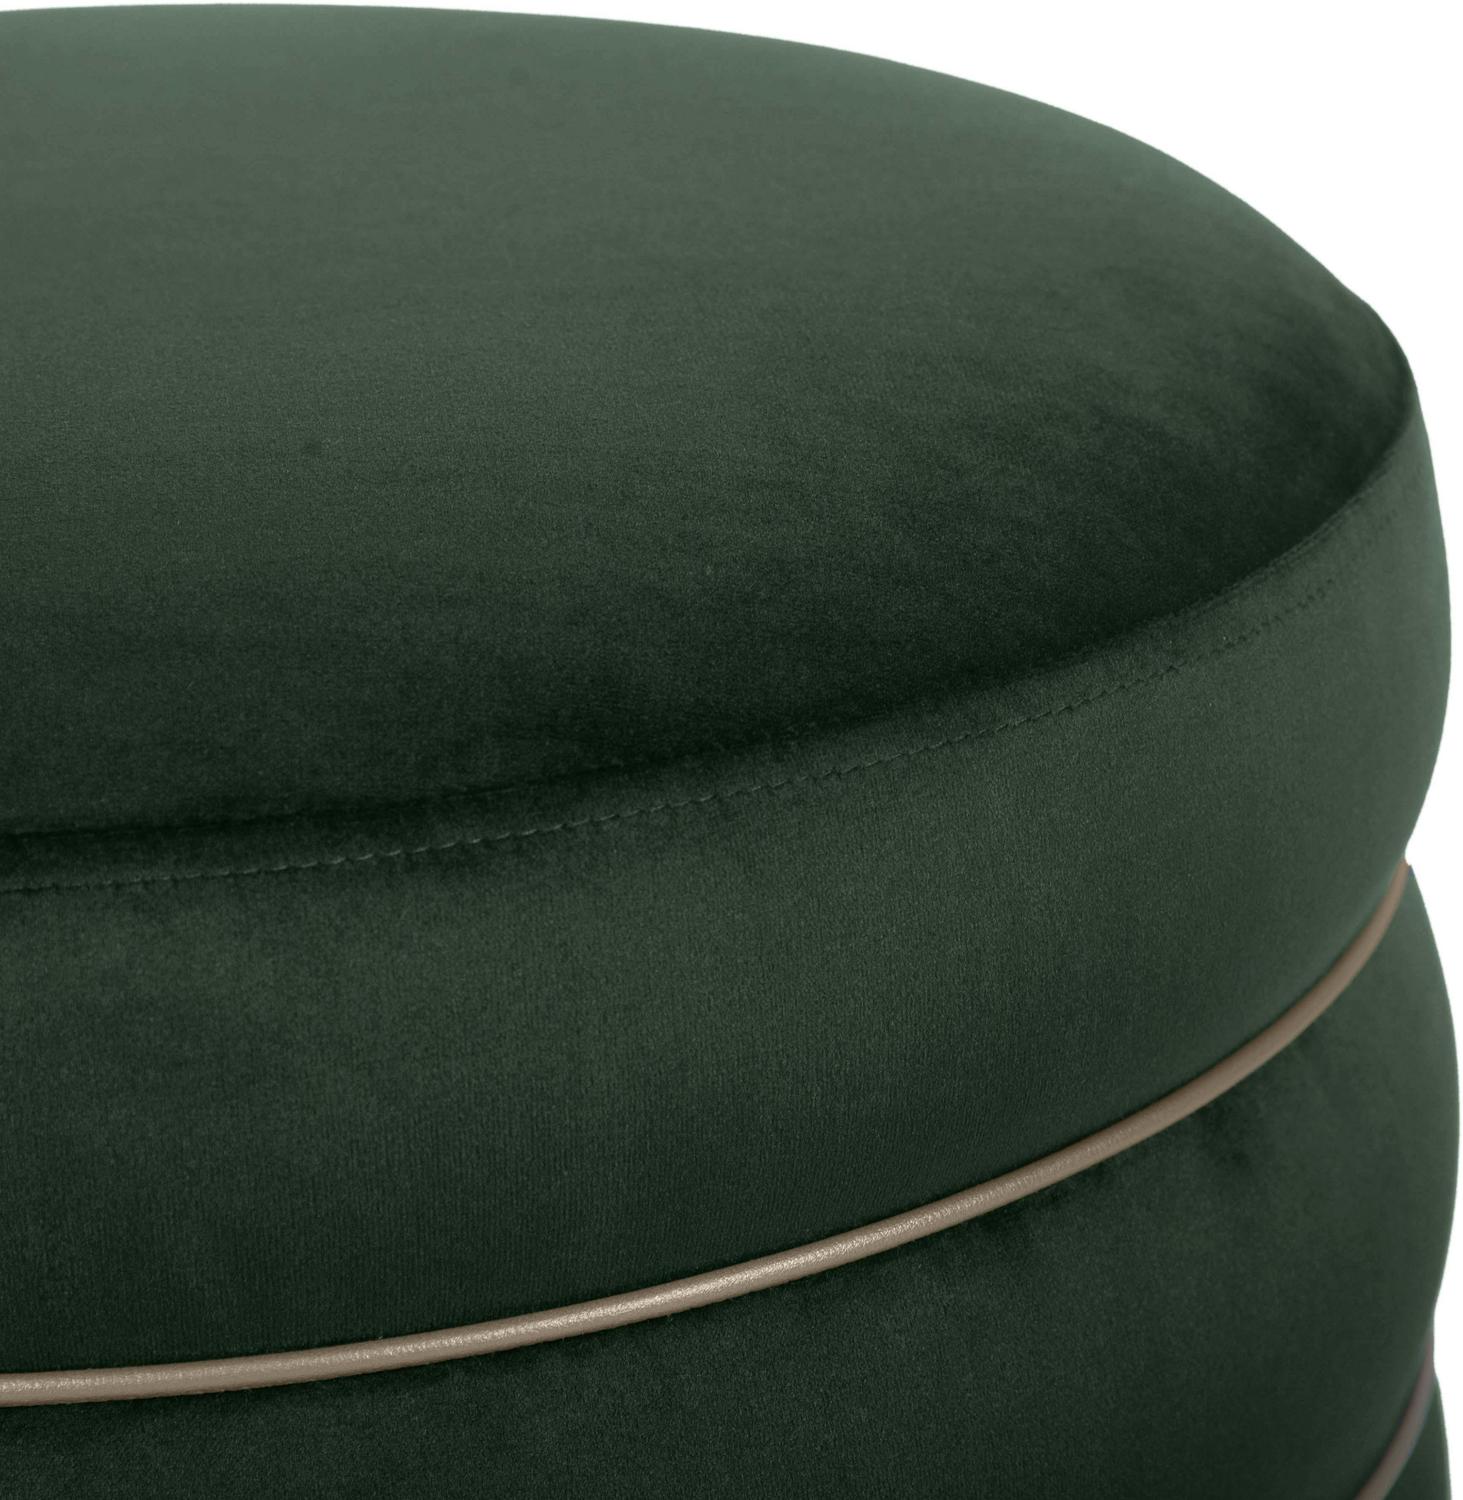 upholstered ottoman stool Contemporary Design Furniture Ottomans Green